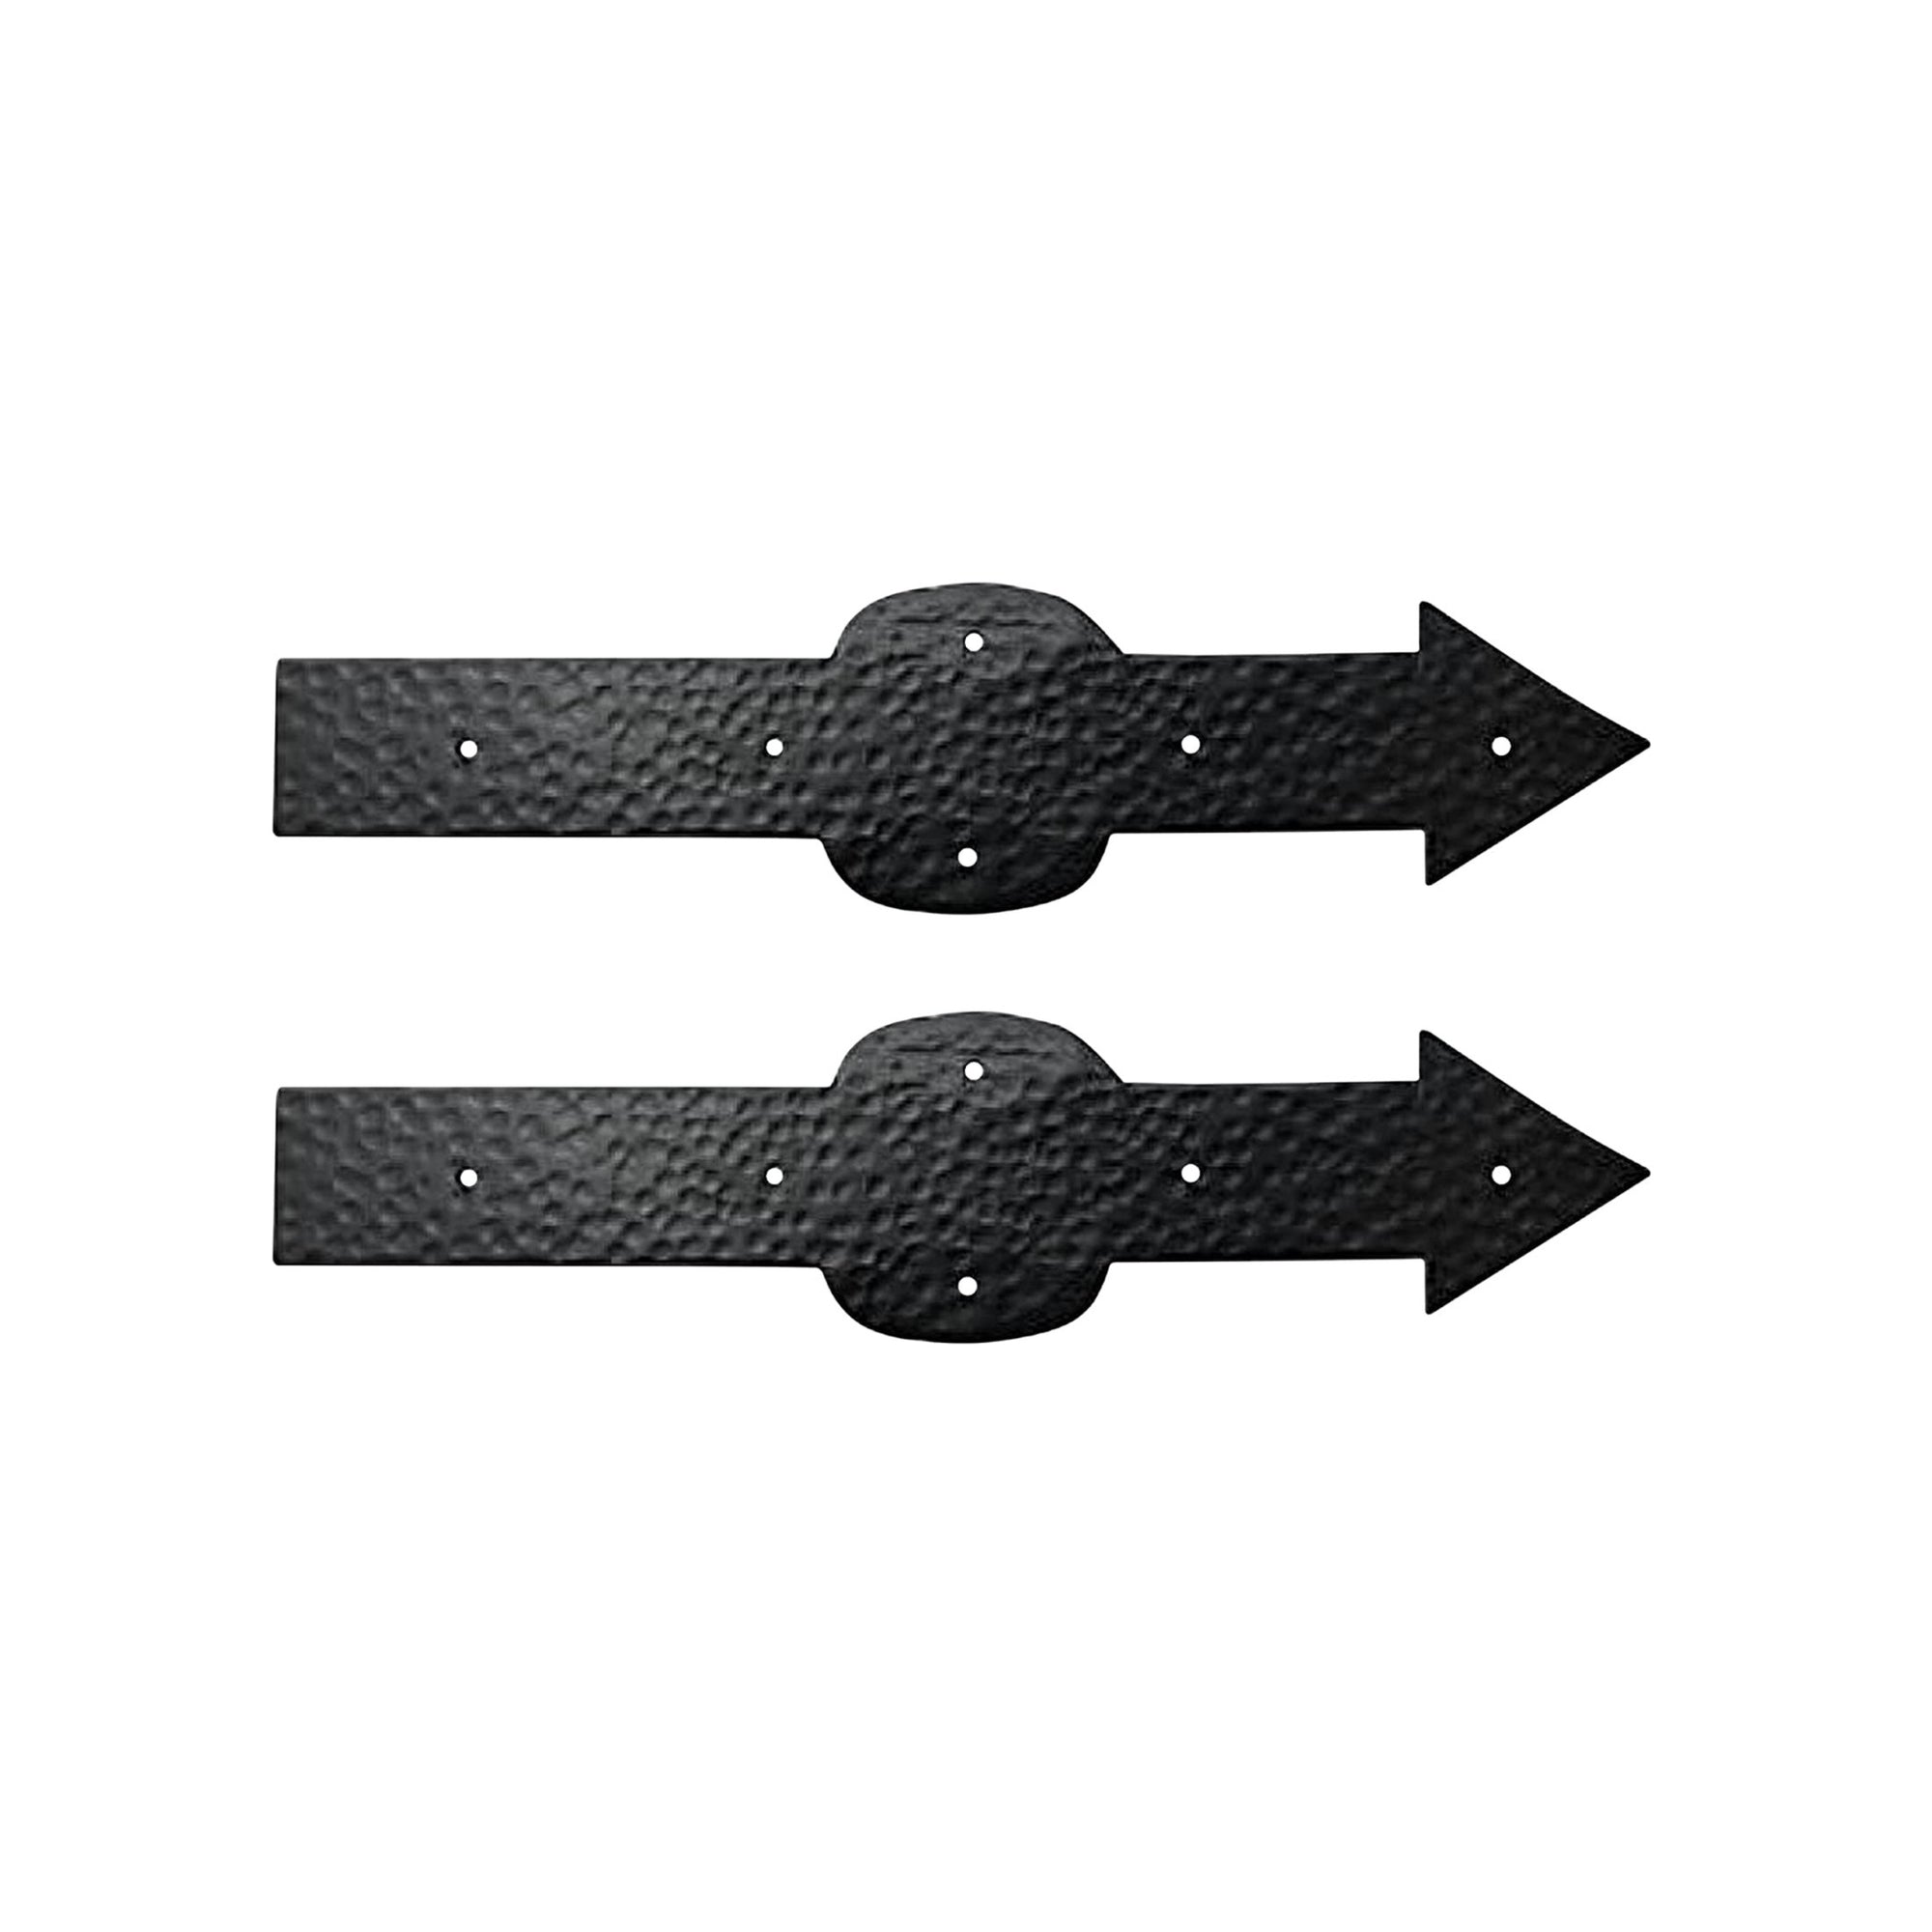 Black Antique Iron Hand Forged False Hinge Front Set -2- Piece Heavy Duty Gate False Hinges for Wooden and Metal Fences, Doors, Cabinets - Black Powder Coated Finish